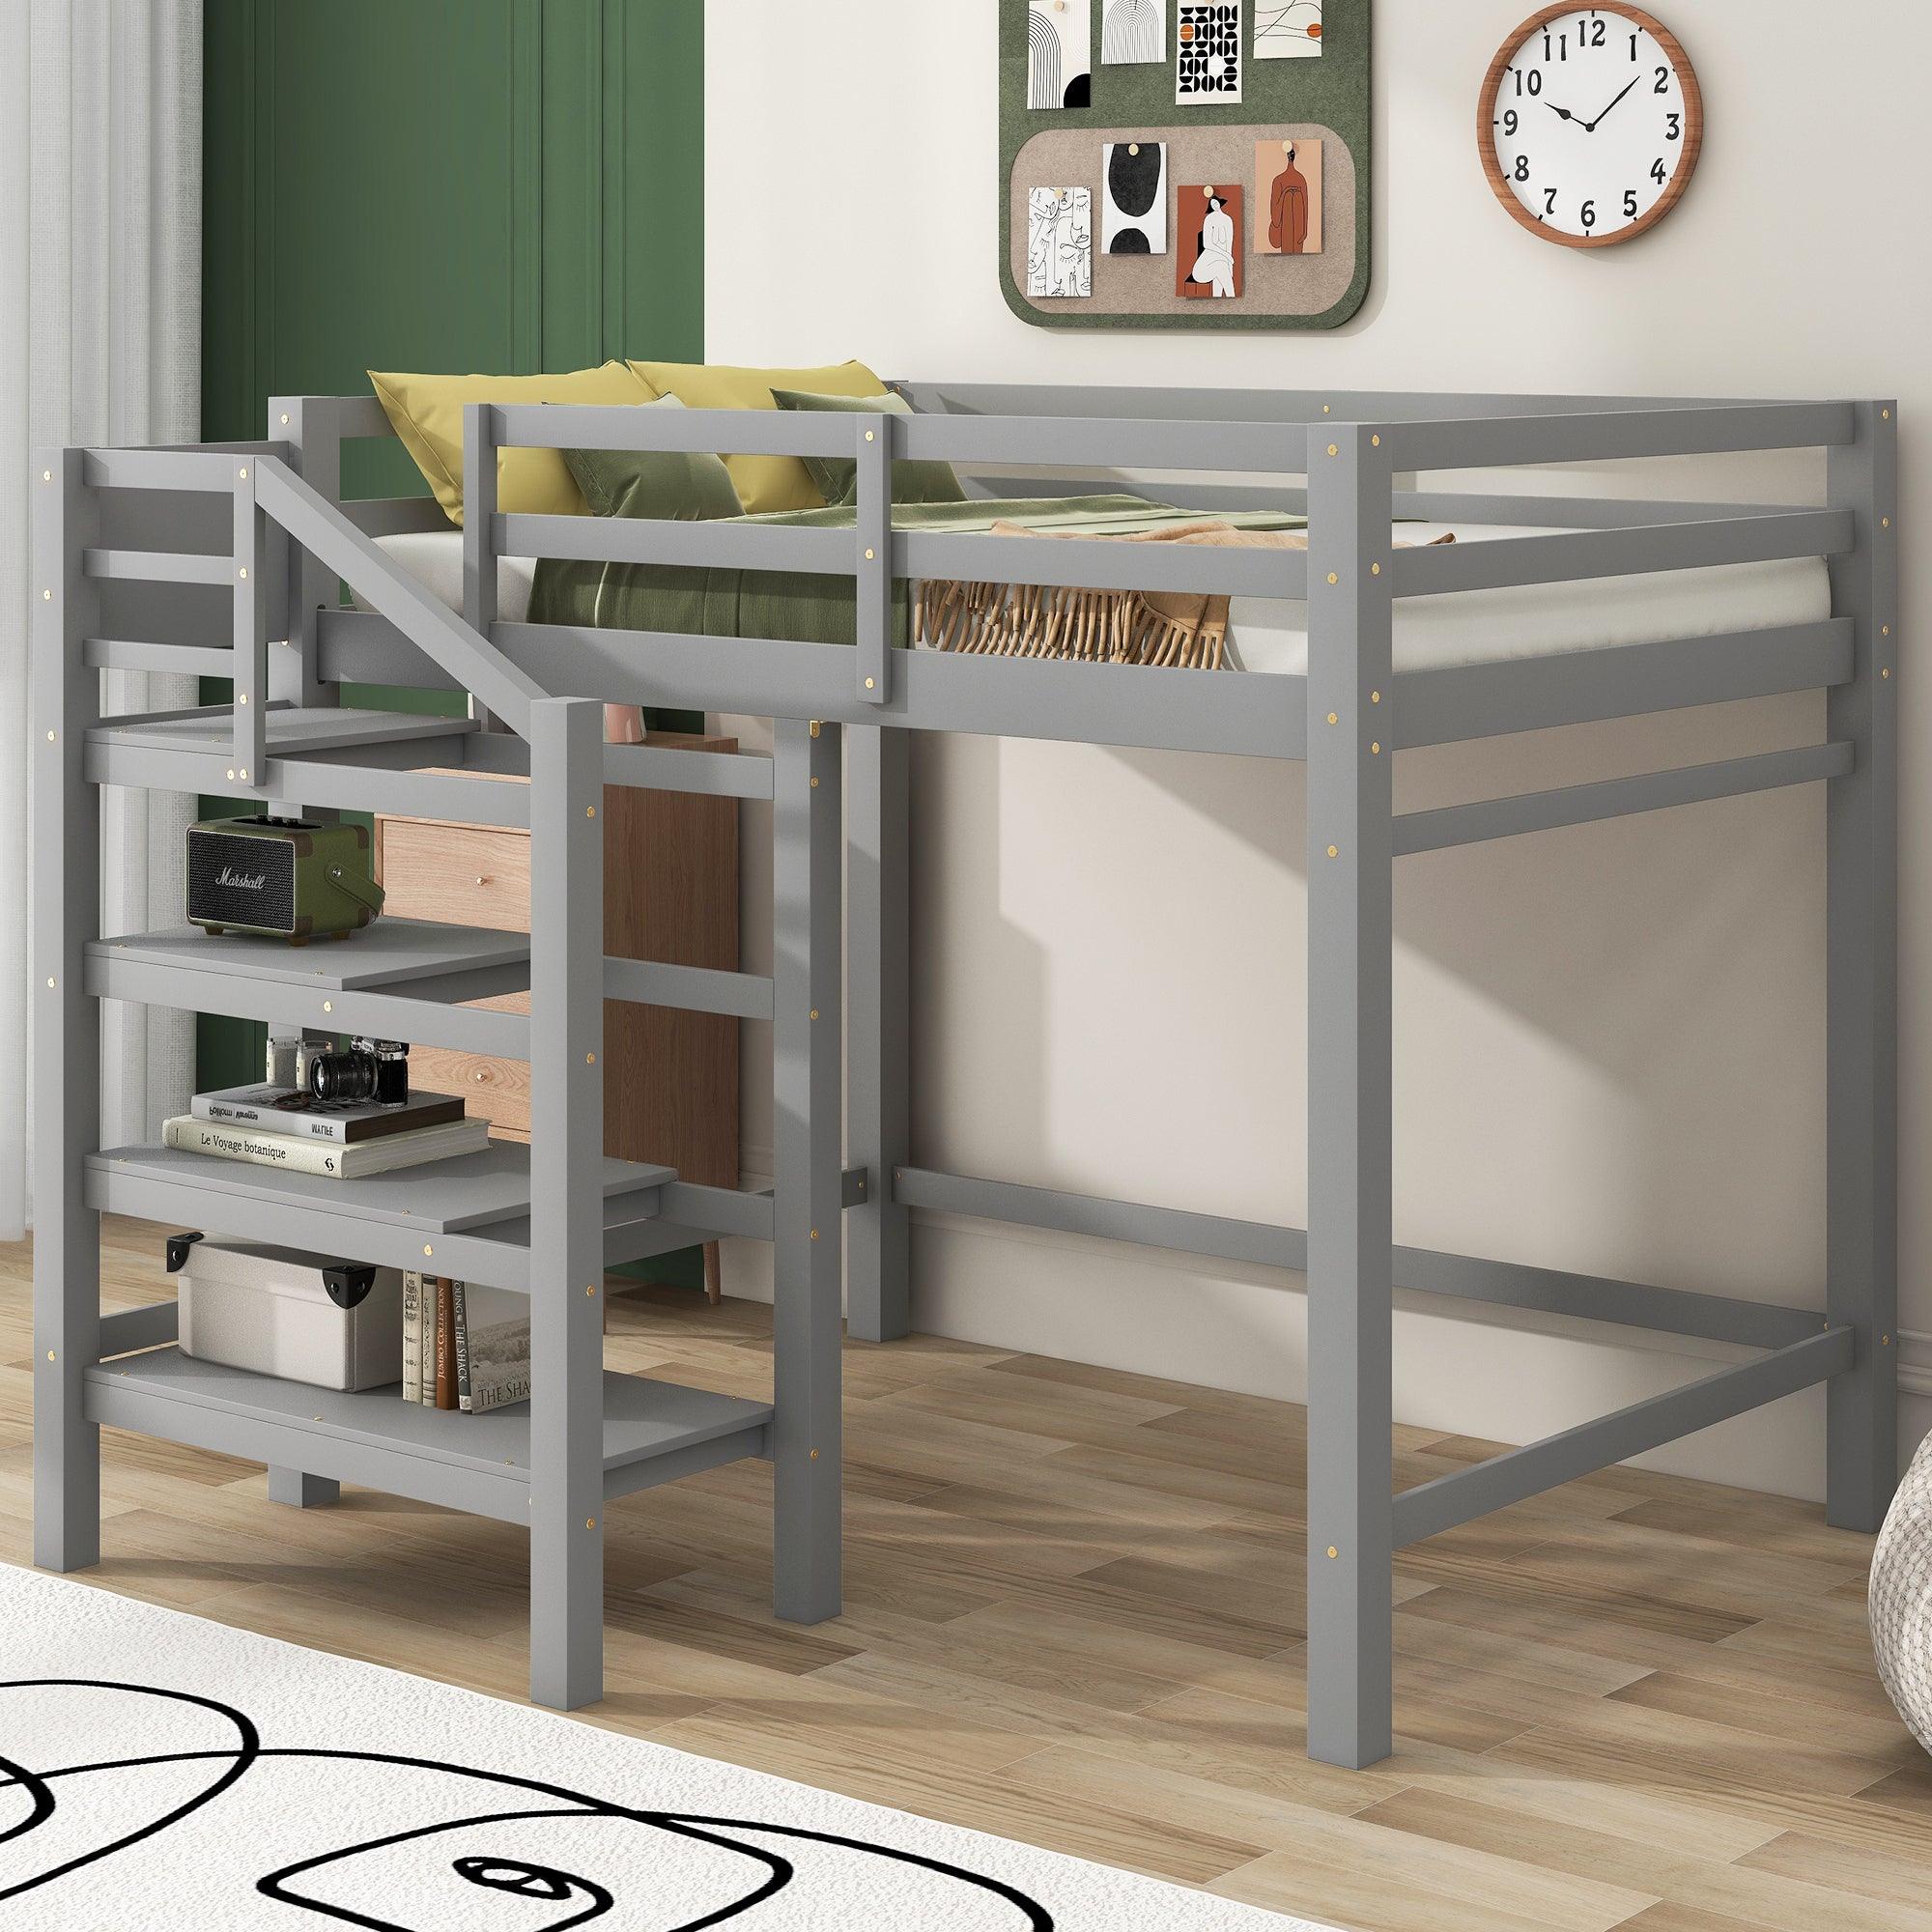 🆓🚛 Full Size Loft Bed With Built-in Storage Staircase and Hanger for Clothes, Gray